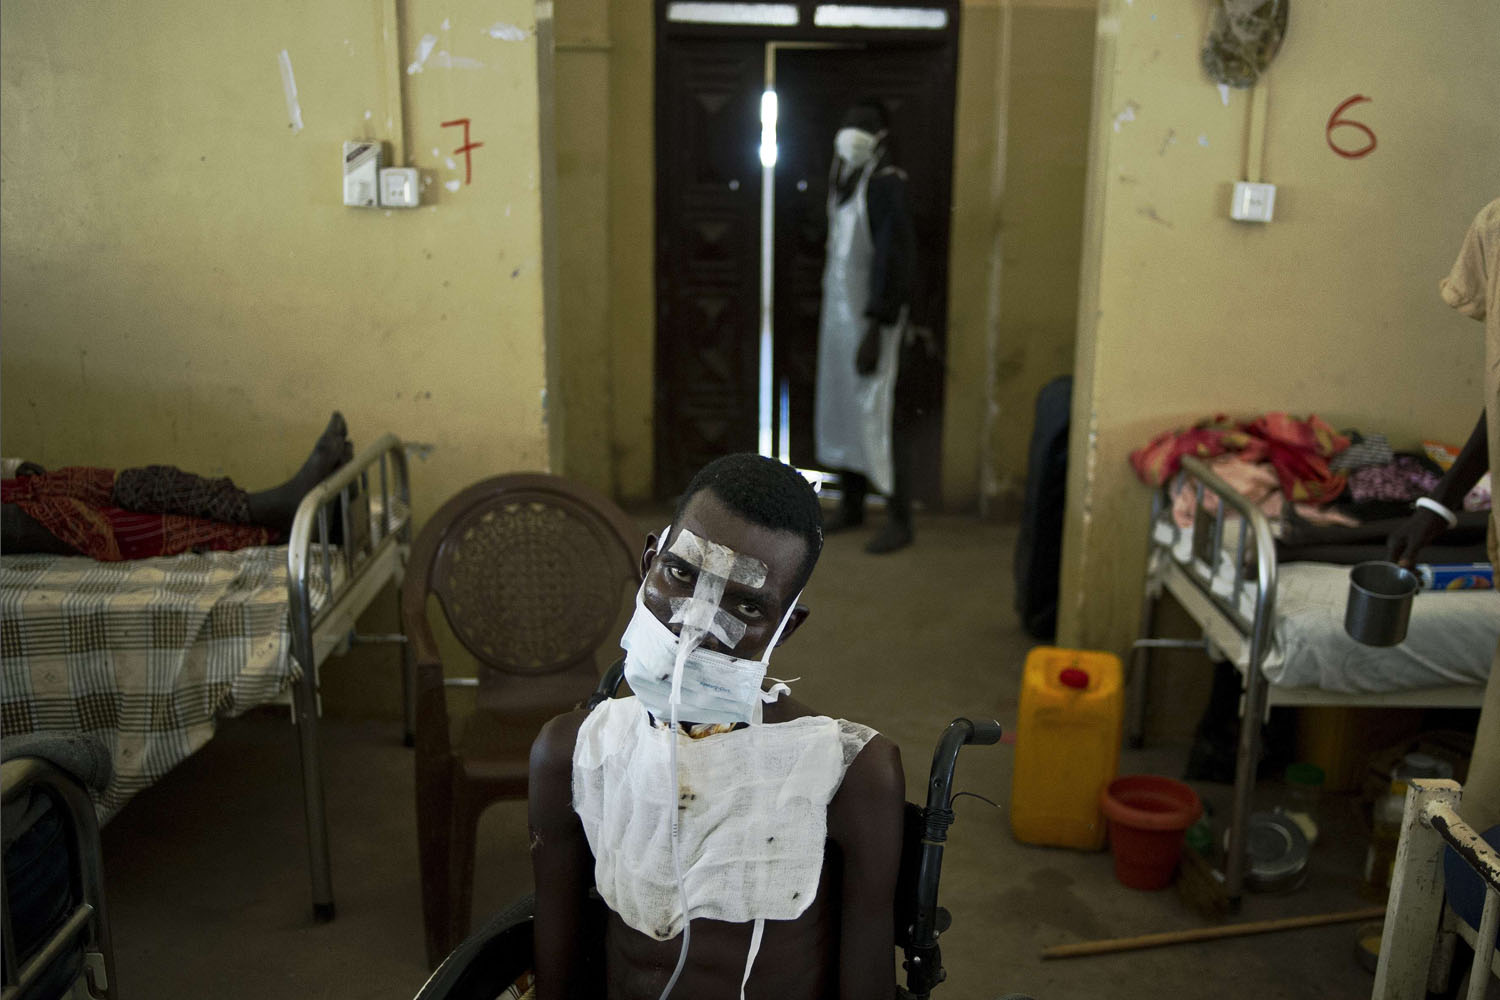 Feb. 5, 2014. A patient being treated for multiple gunshot wounds to the face, chest and throat sits in a wheelchair in the Malakal teaching hospital.